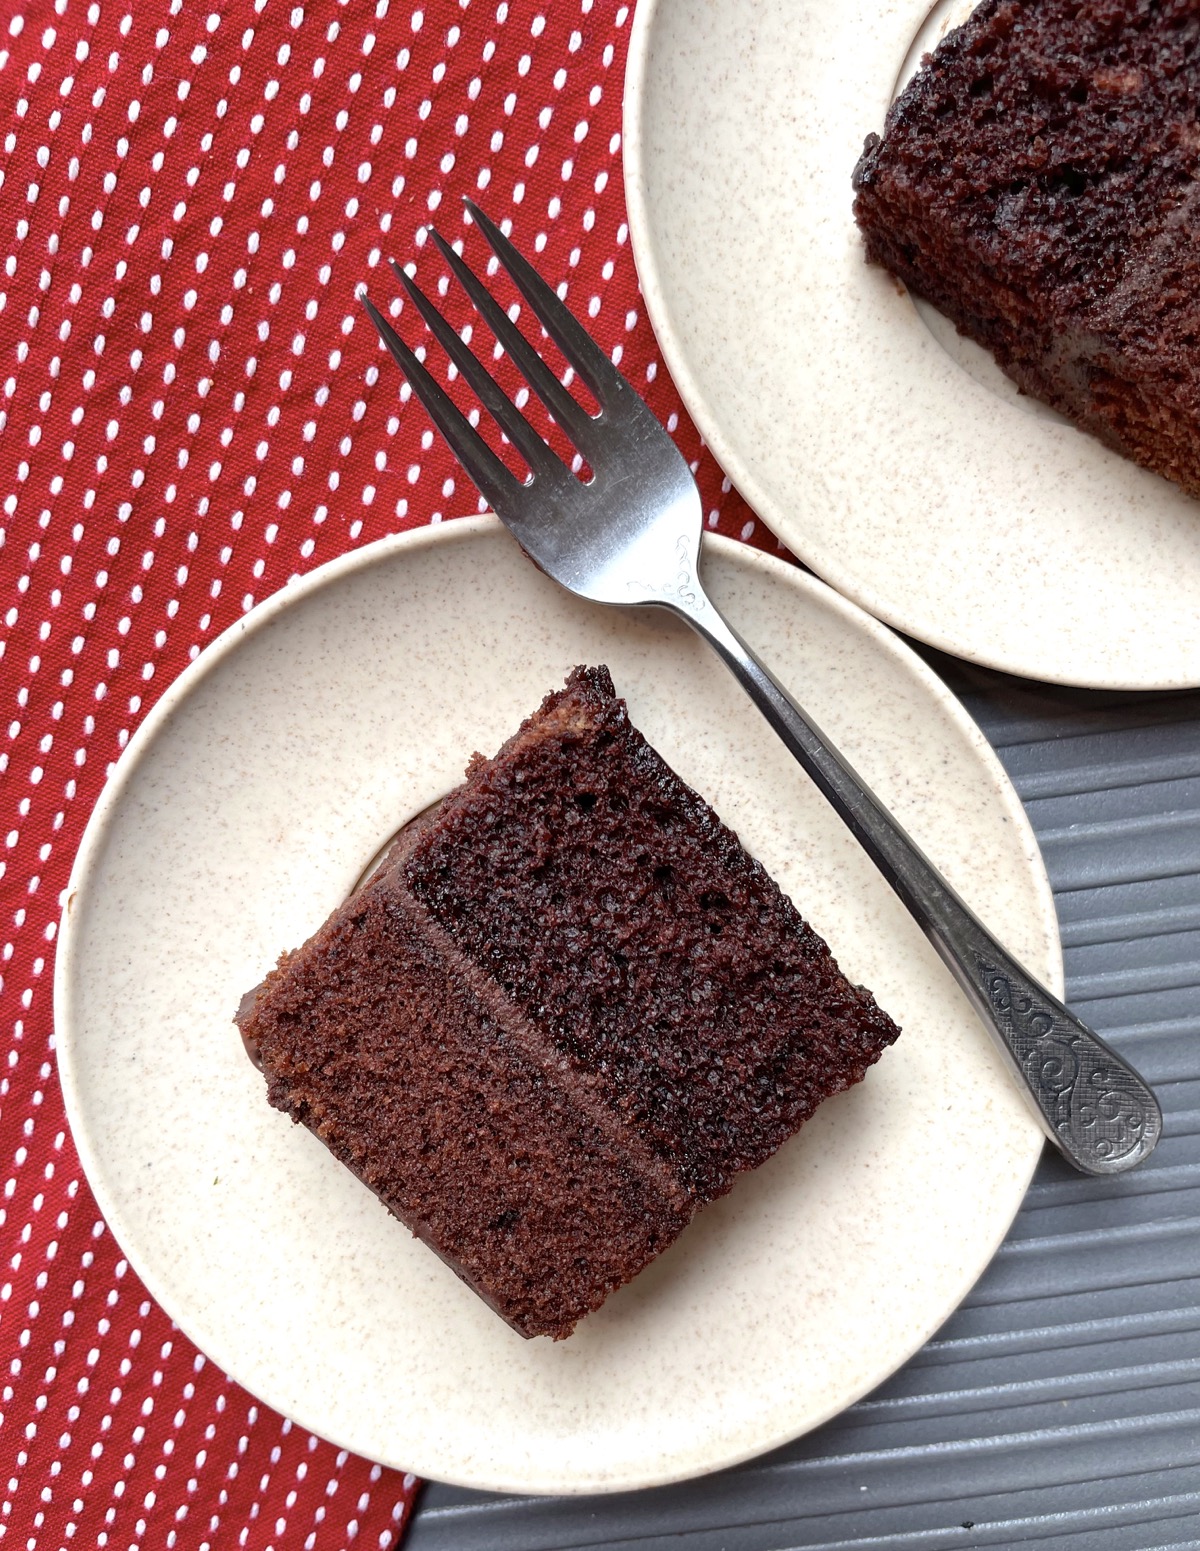 Slice of double layer chocolate cake with chocolate frosting on a plate.